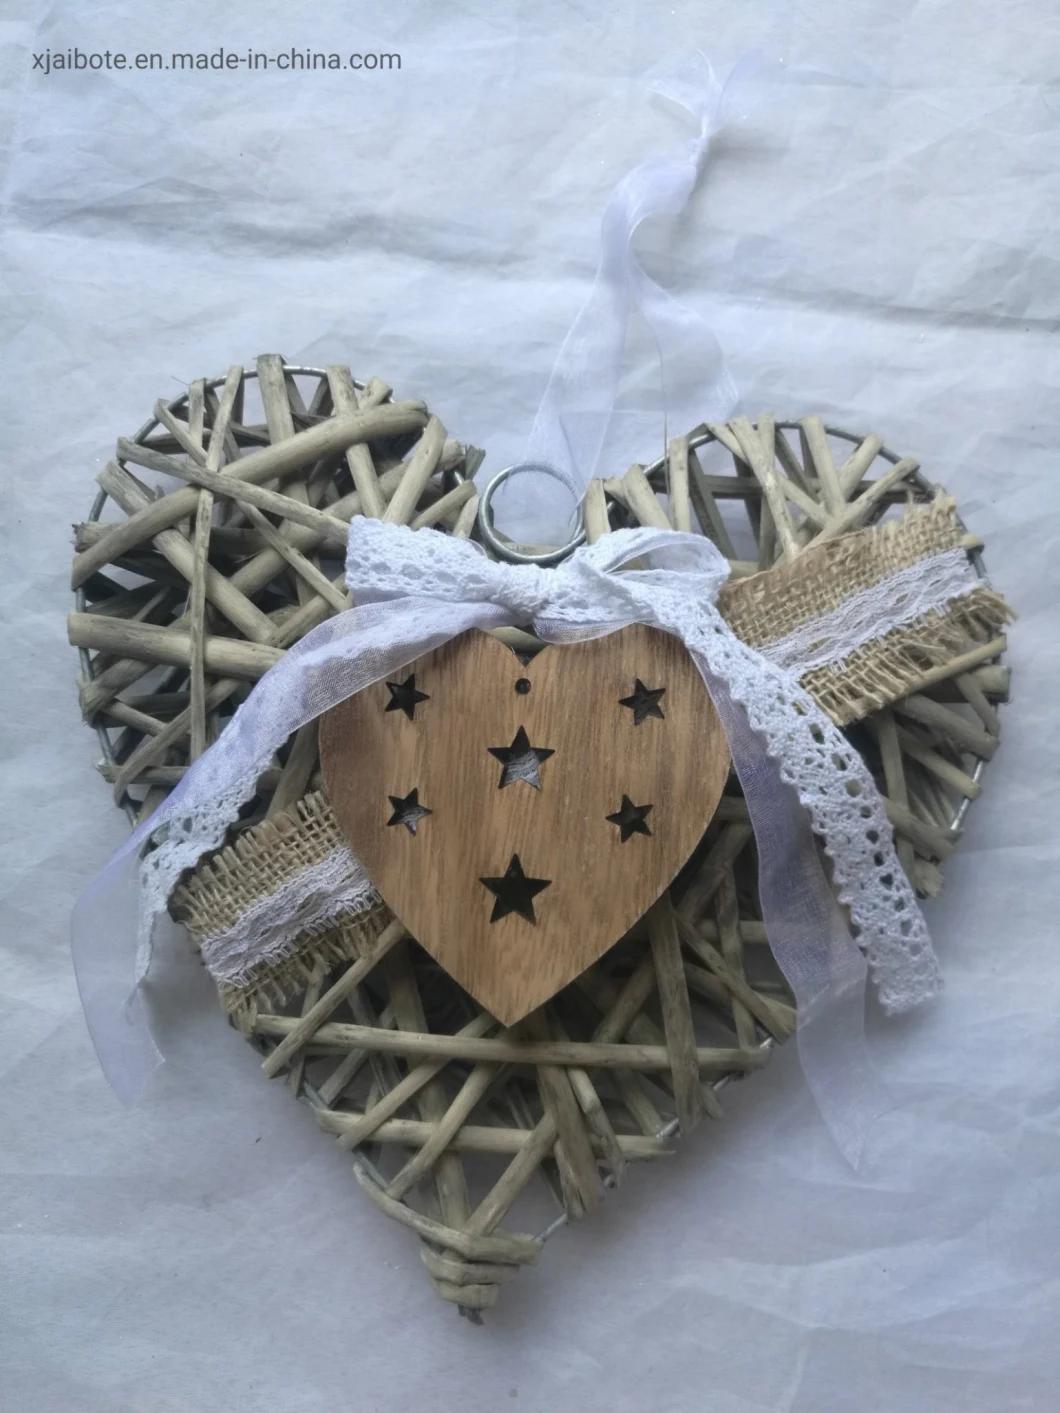 Customized White Fancy Natural Material Heart Shape Home Hanging Decor